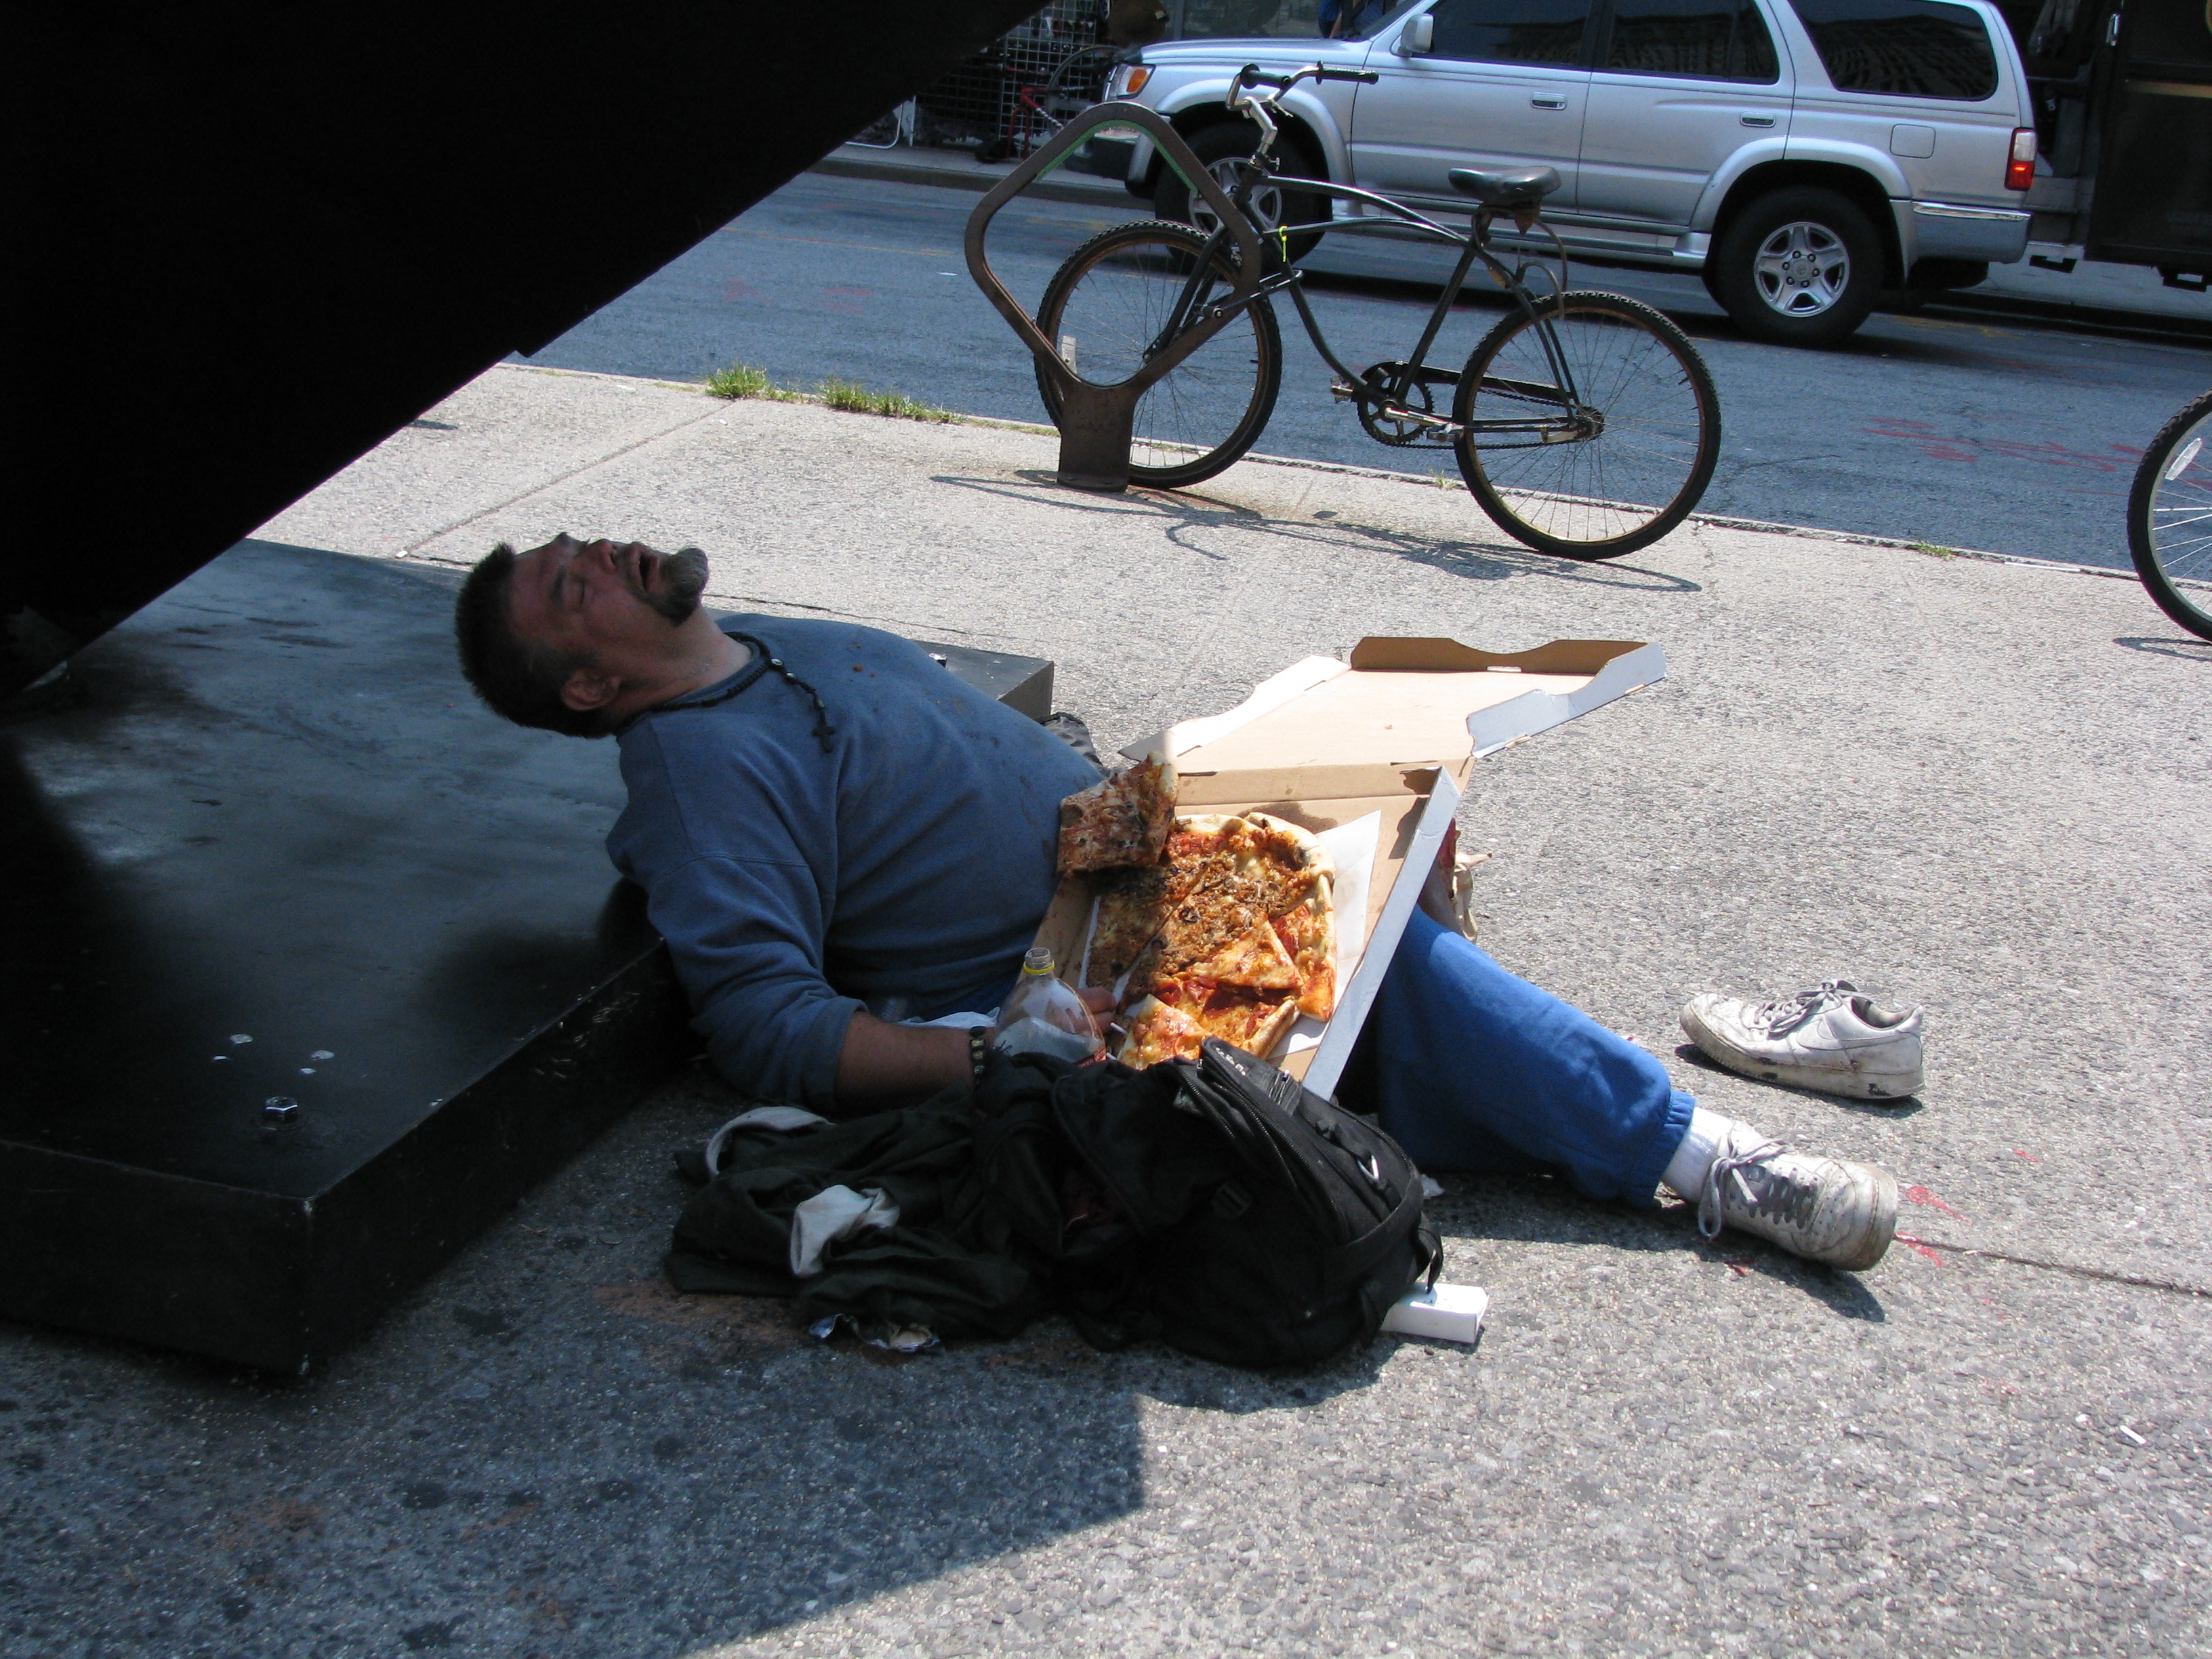 Man asleep under The Cube with pizza